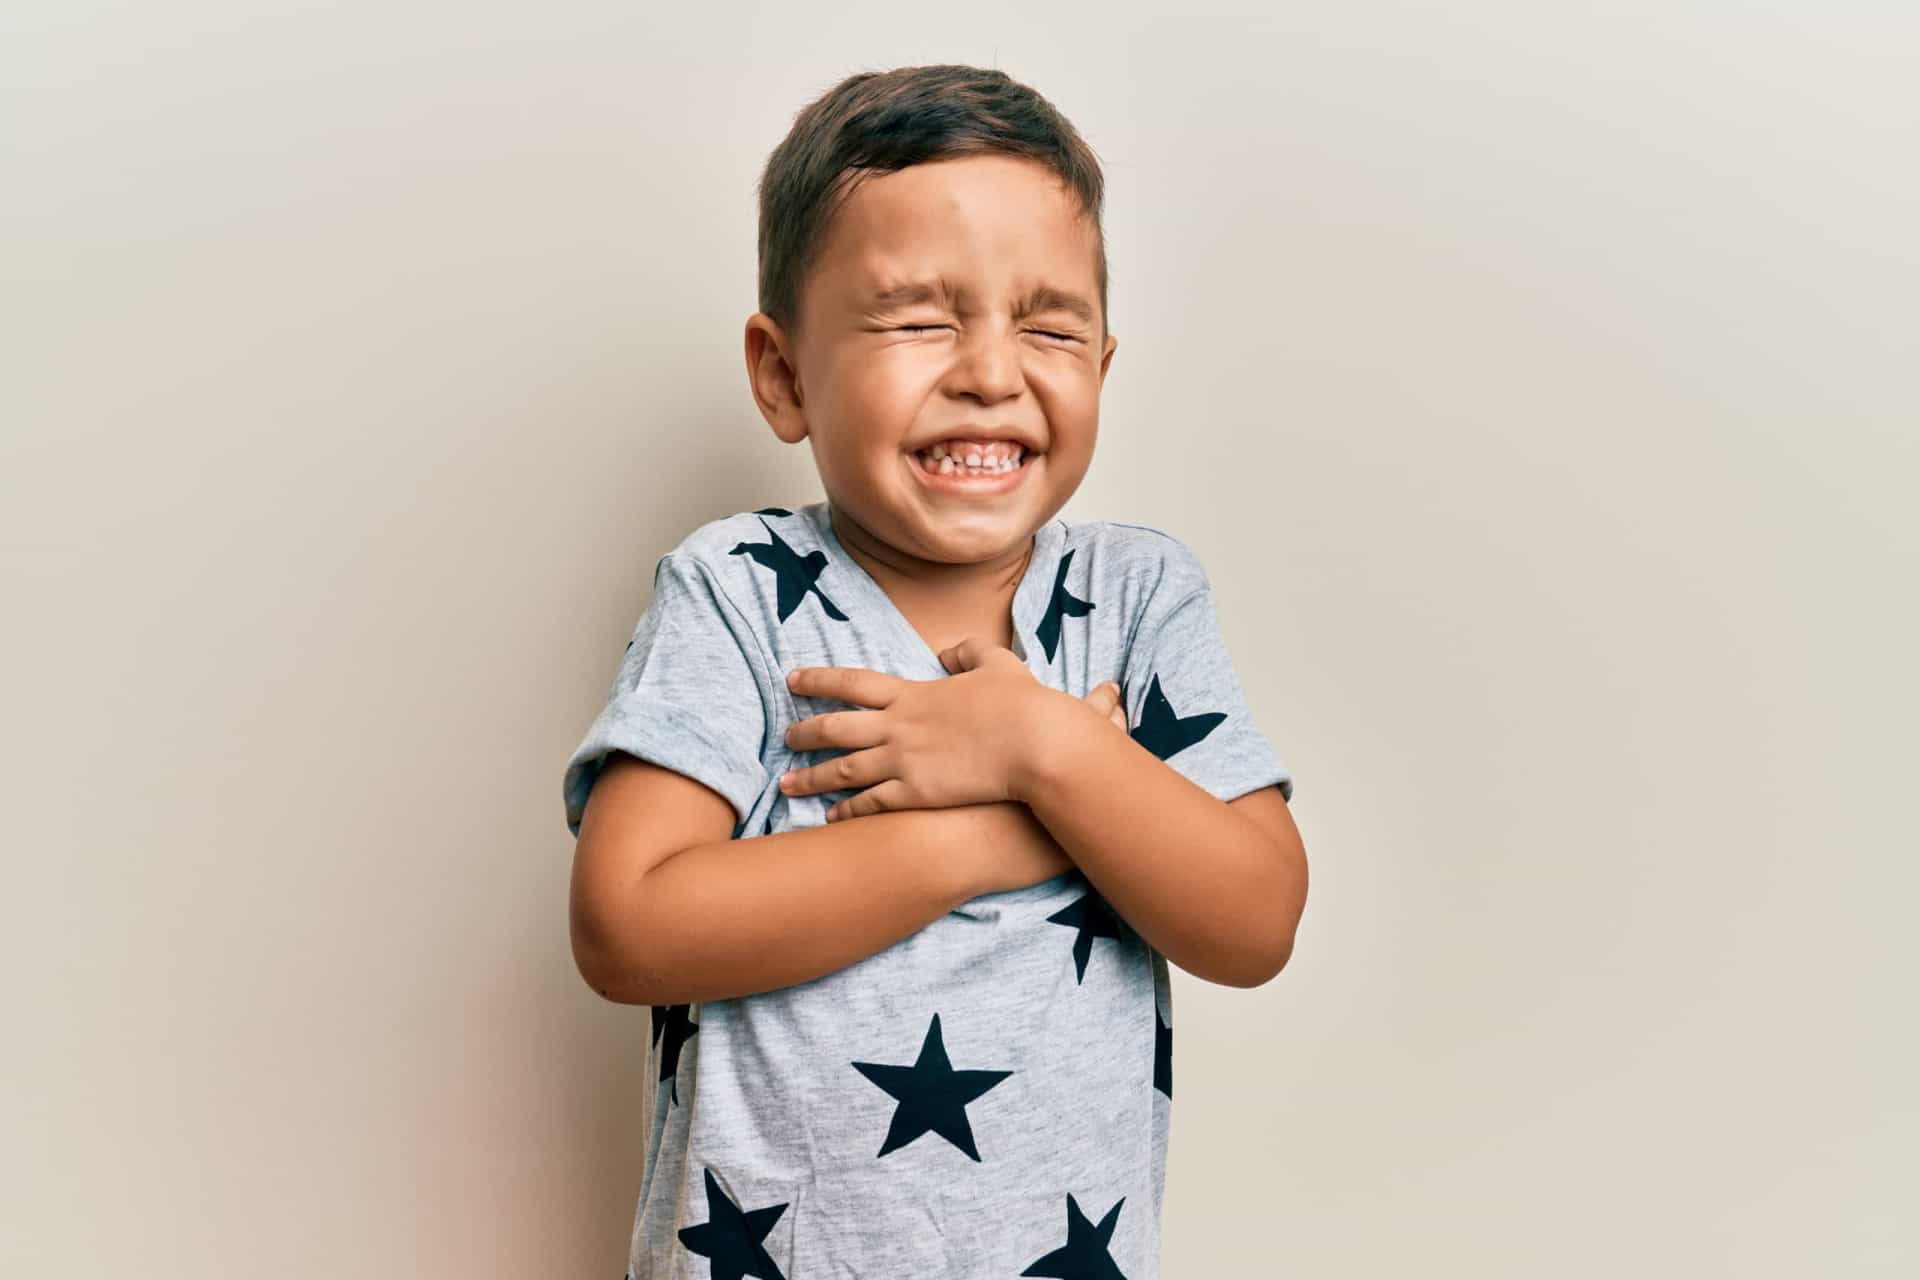 <p><span>In some cases, an otherwise confident child with selective mutism may use other means of communication, such as hand gestures or body language. </span></p><p><a href="https://www.msn.com/en-us/community/channel/vid-7xx8mnucu55yw63we9va2gwr7uihbxwc68fxqp25x6tg4ftibpra?cvid=94631541bc0f4f89bfd59158d696ad7e">Follow us and access great exclusive content everyday</a></p>